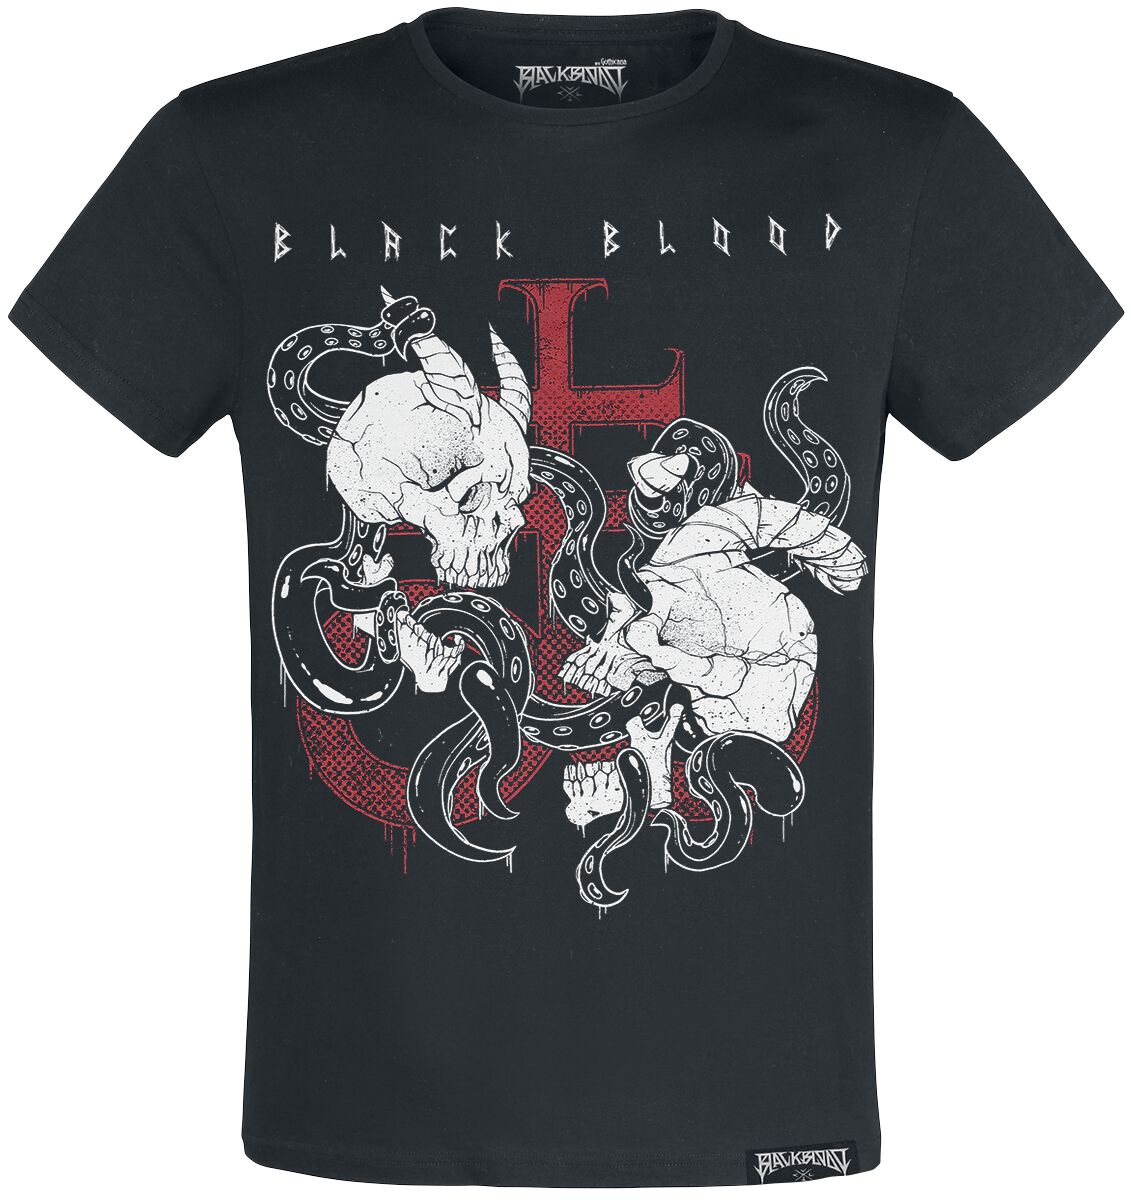 Black Blood by Gothicana T-Shirt with Demon Skull Print T-Shirt schwarz in L